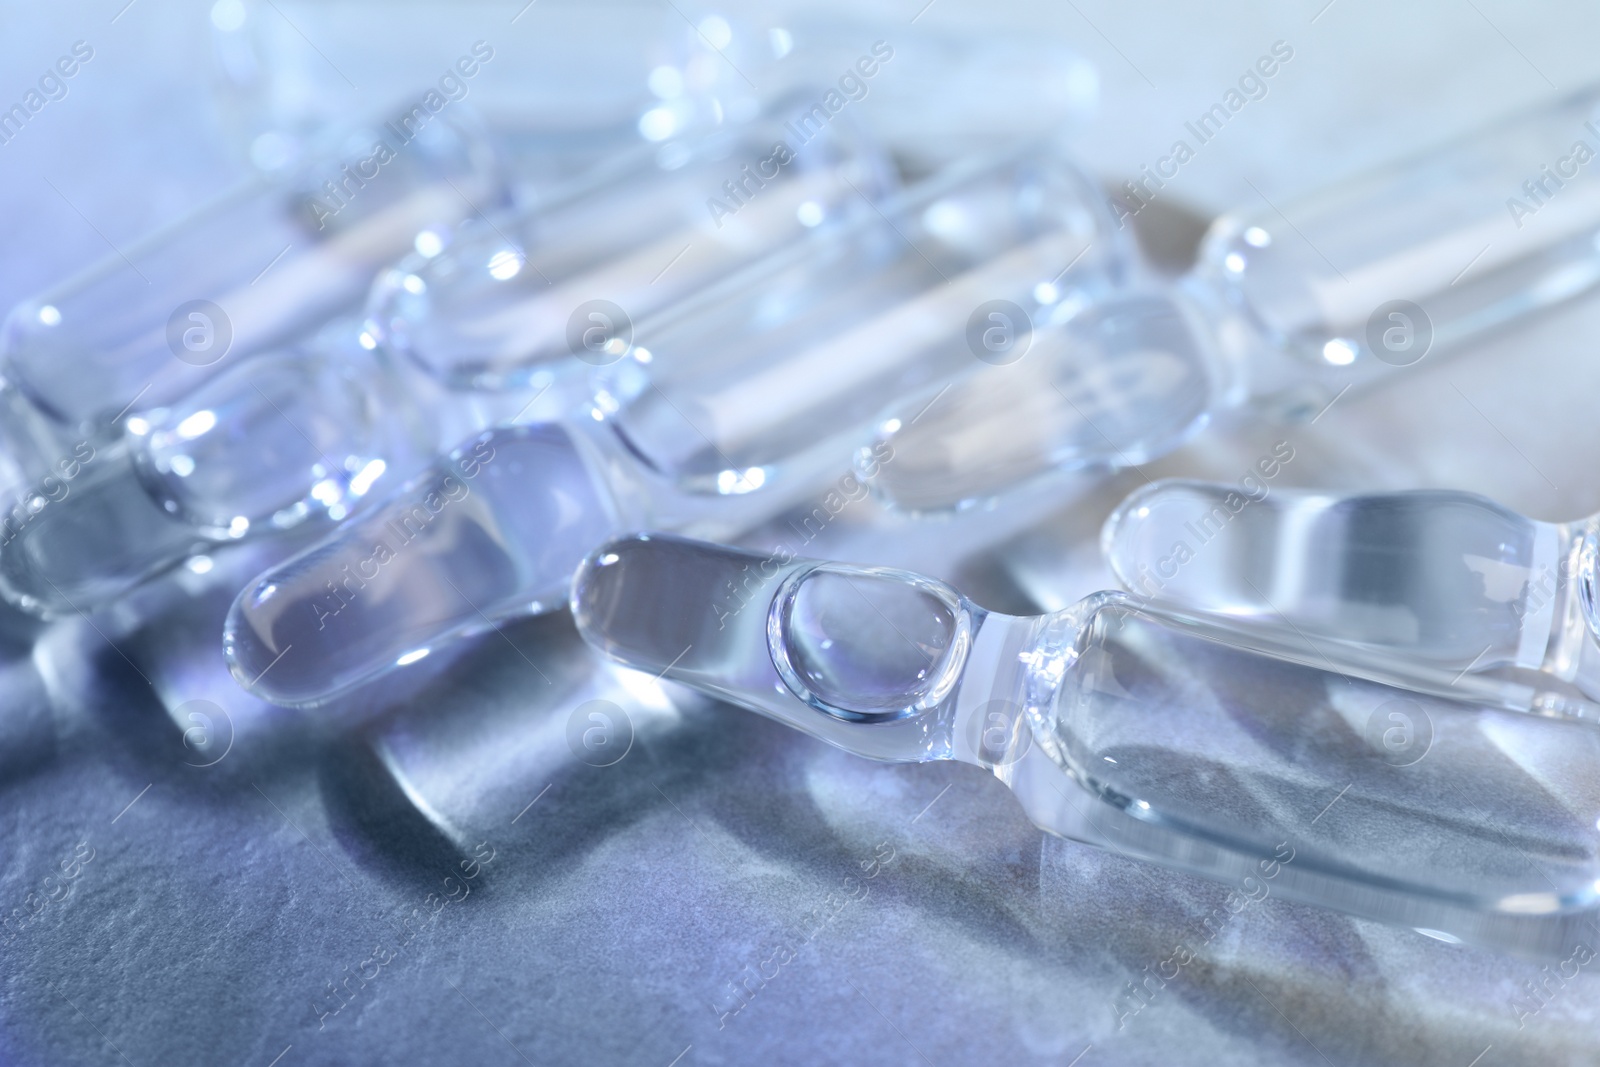 Photo of Pharmaceutical ampoules with medication on grey table, closeup